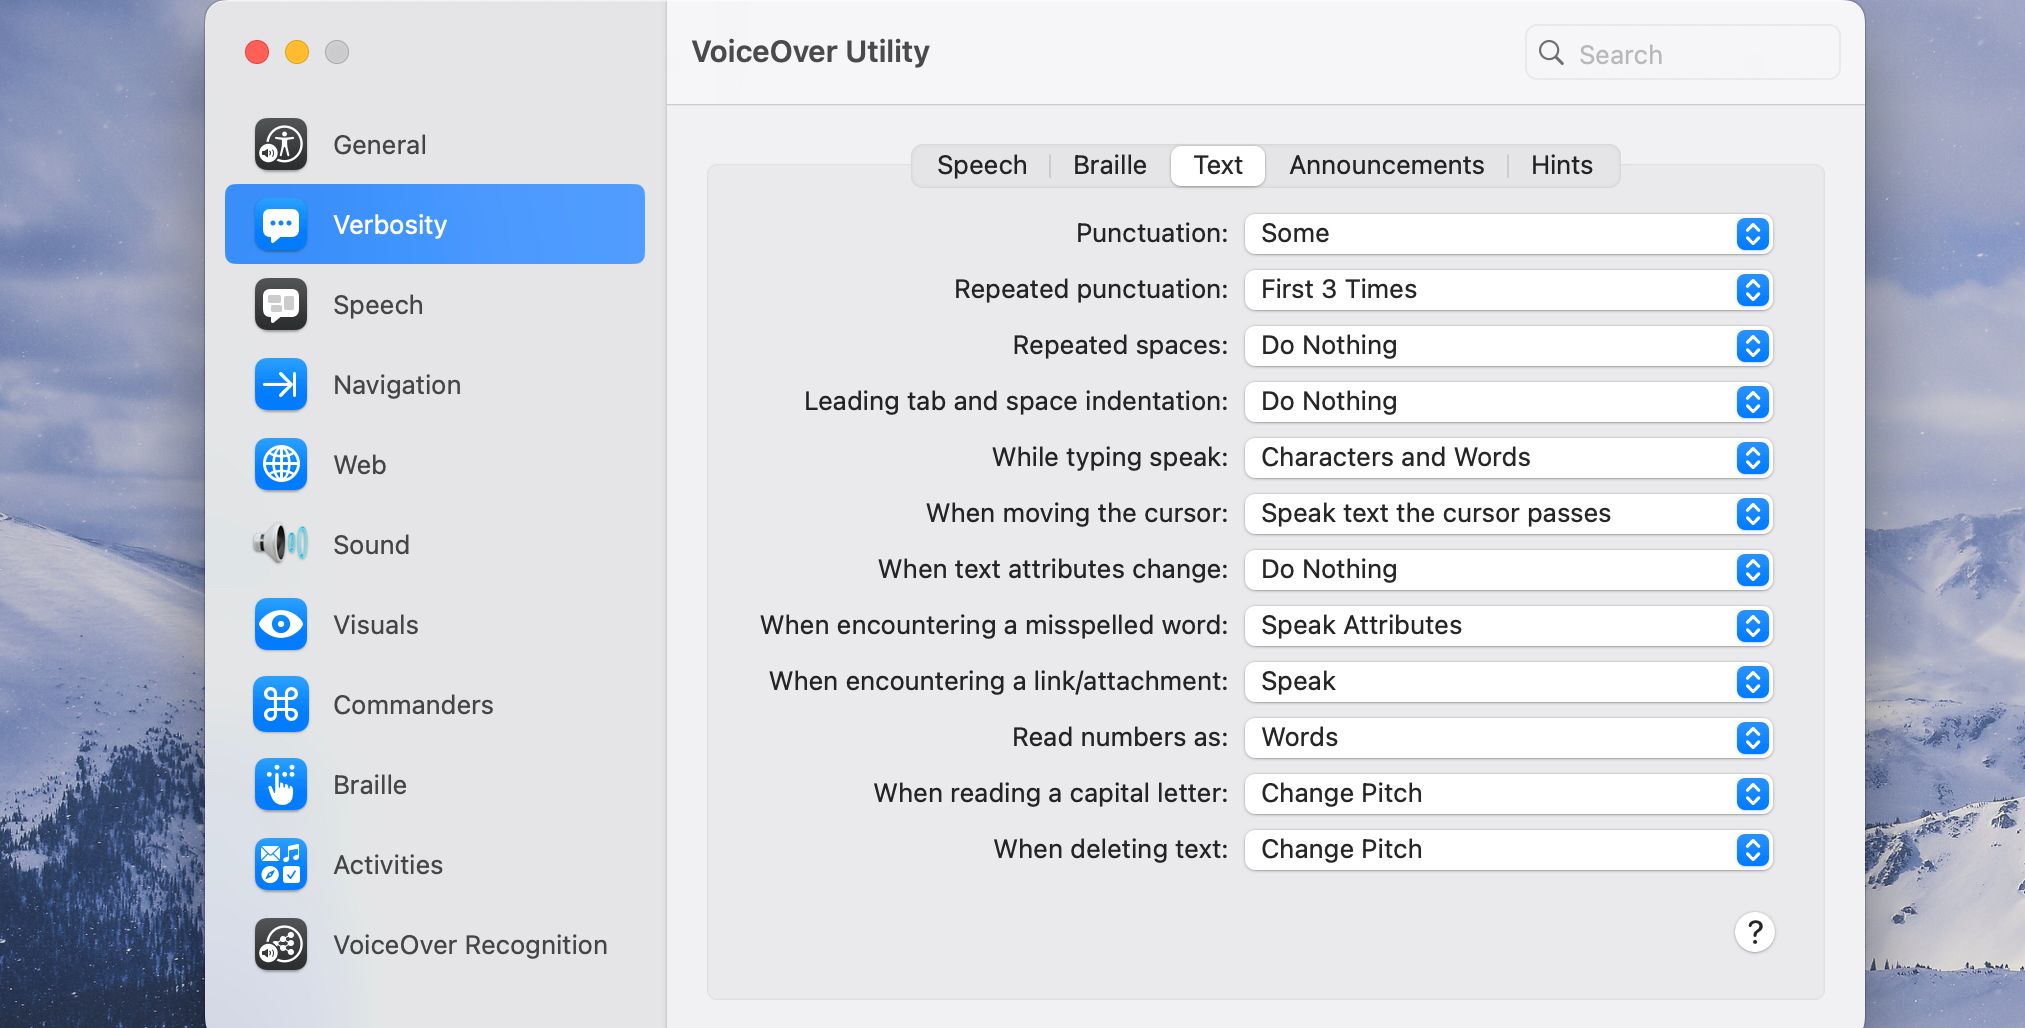 Activate the VoiceOver Text Checker